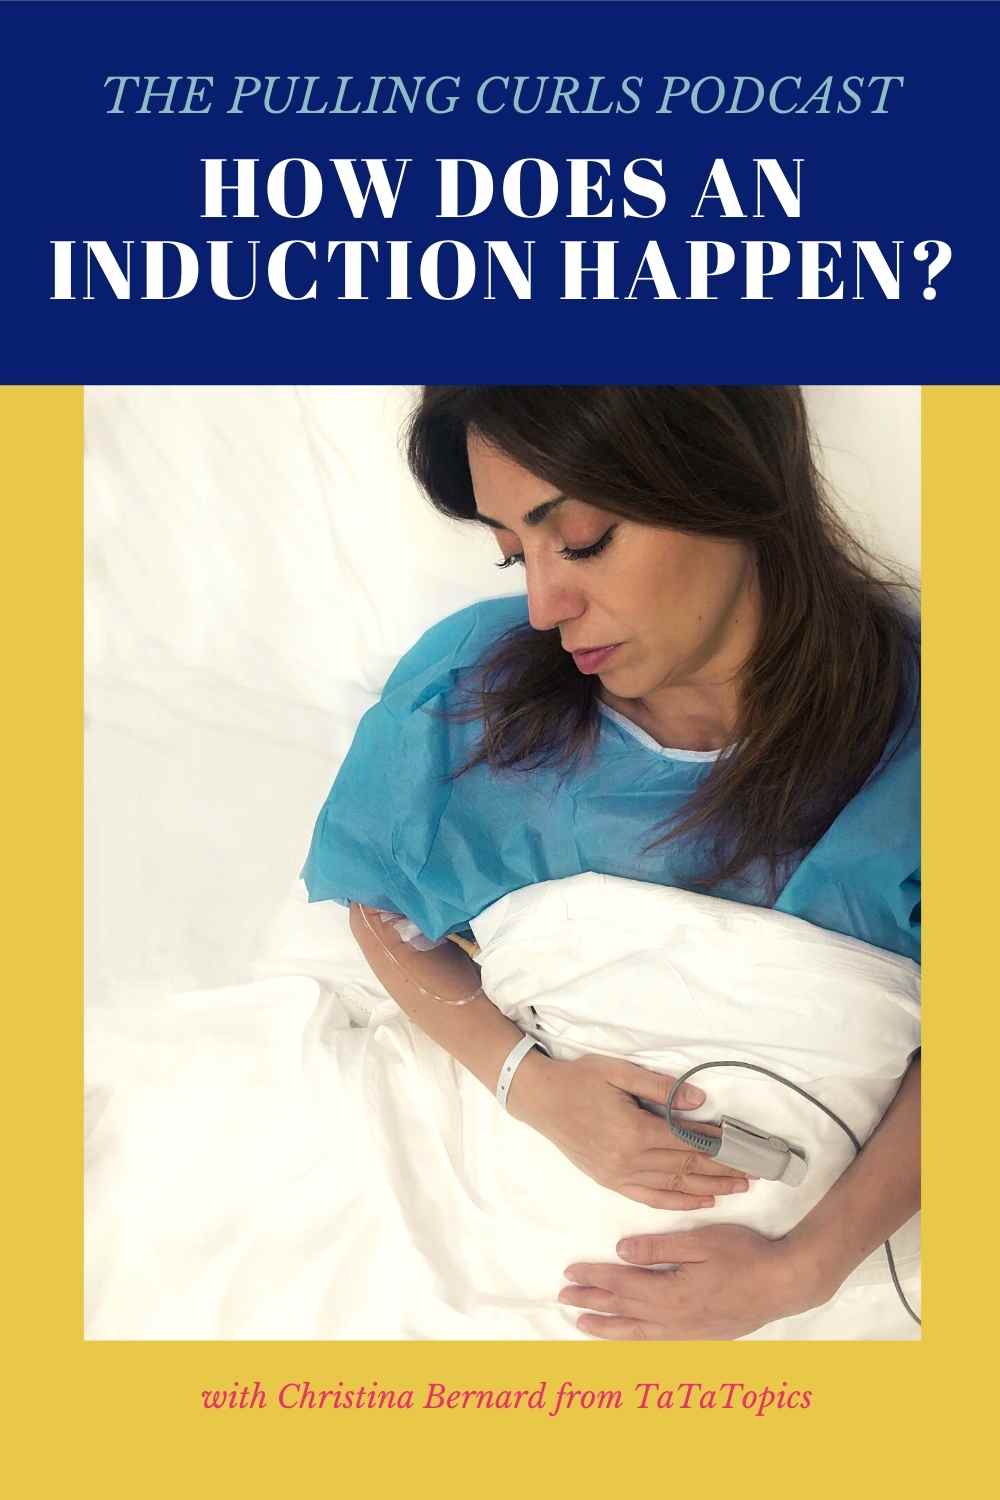 How exactly is an induction going to happen from start to finish. Let's talk about what to expect with two experienced labor nurses. via @pullingcurls